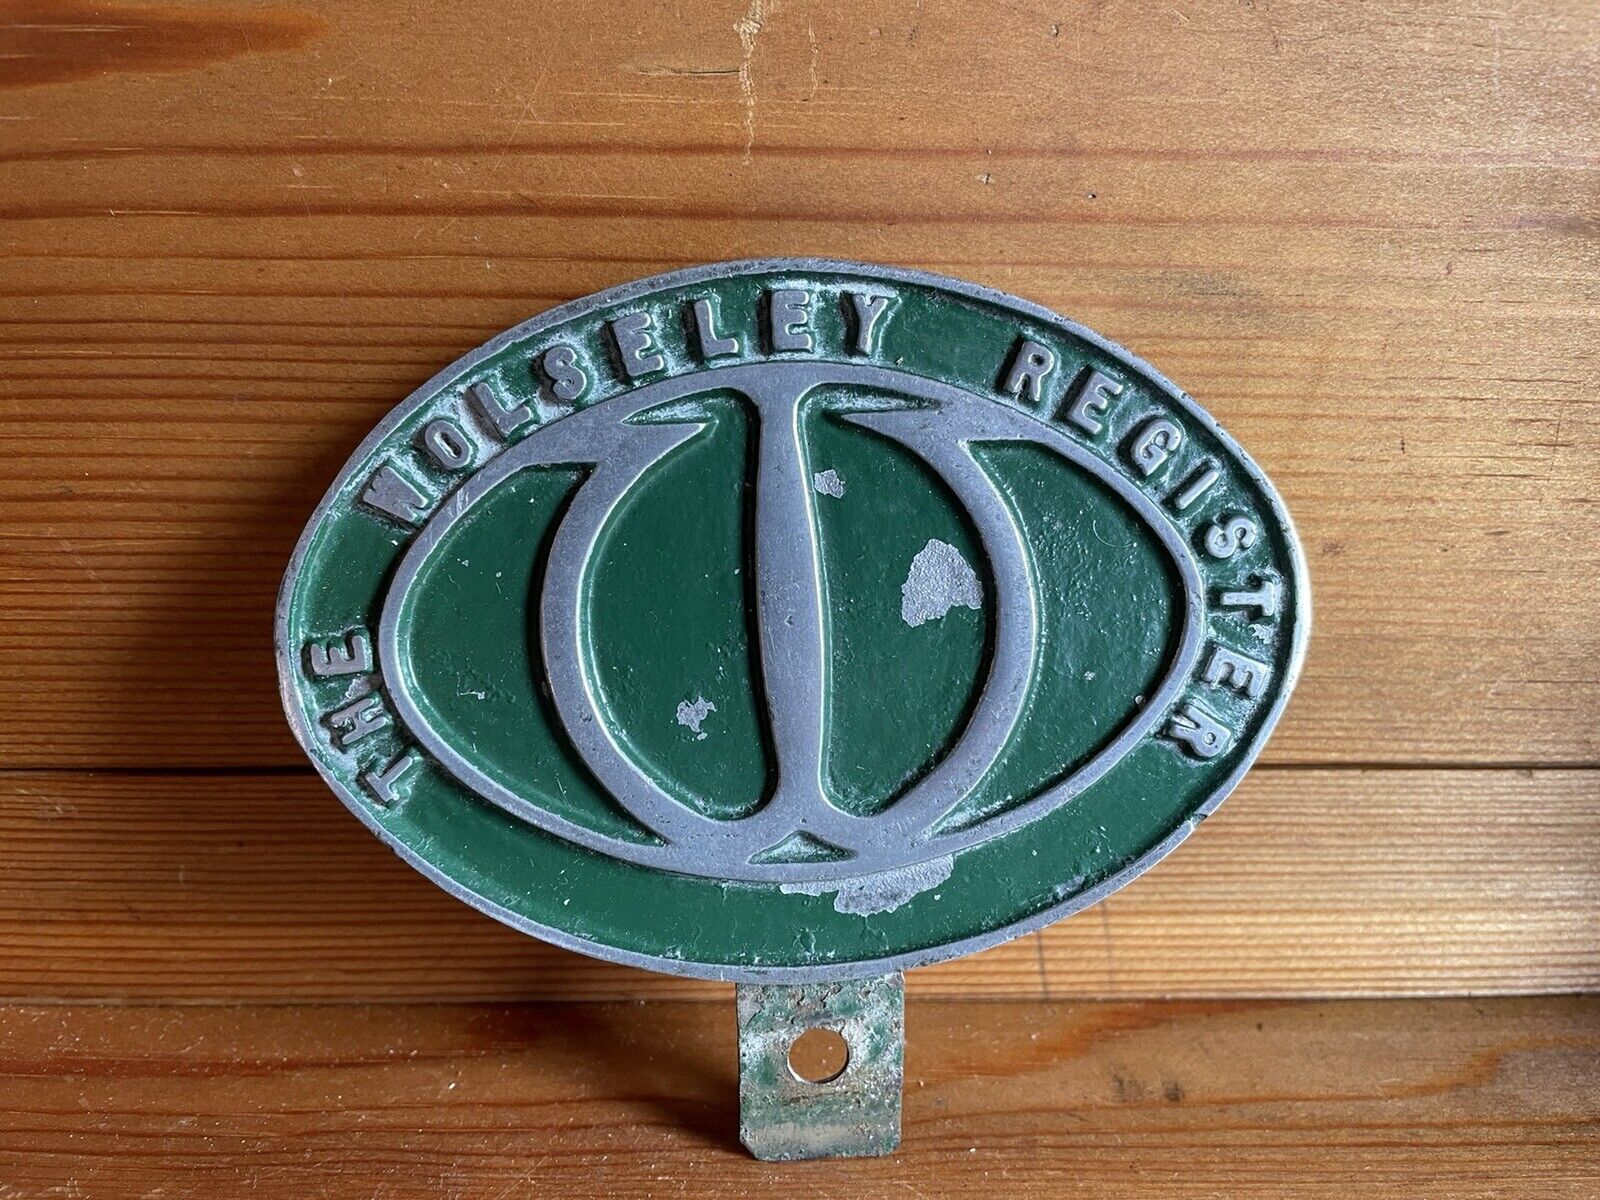 The Wolseley Register Car Grill Badge